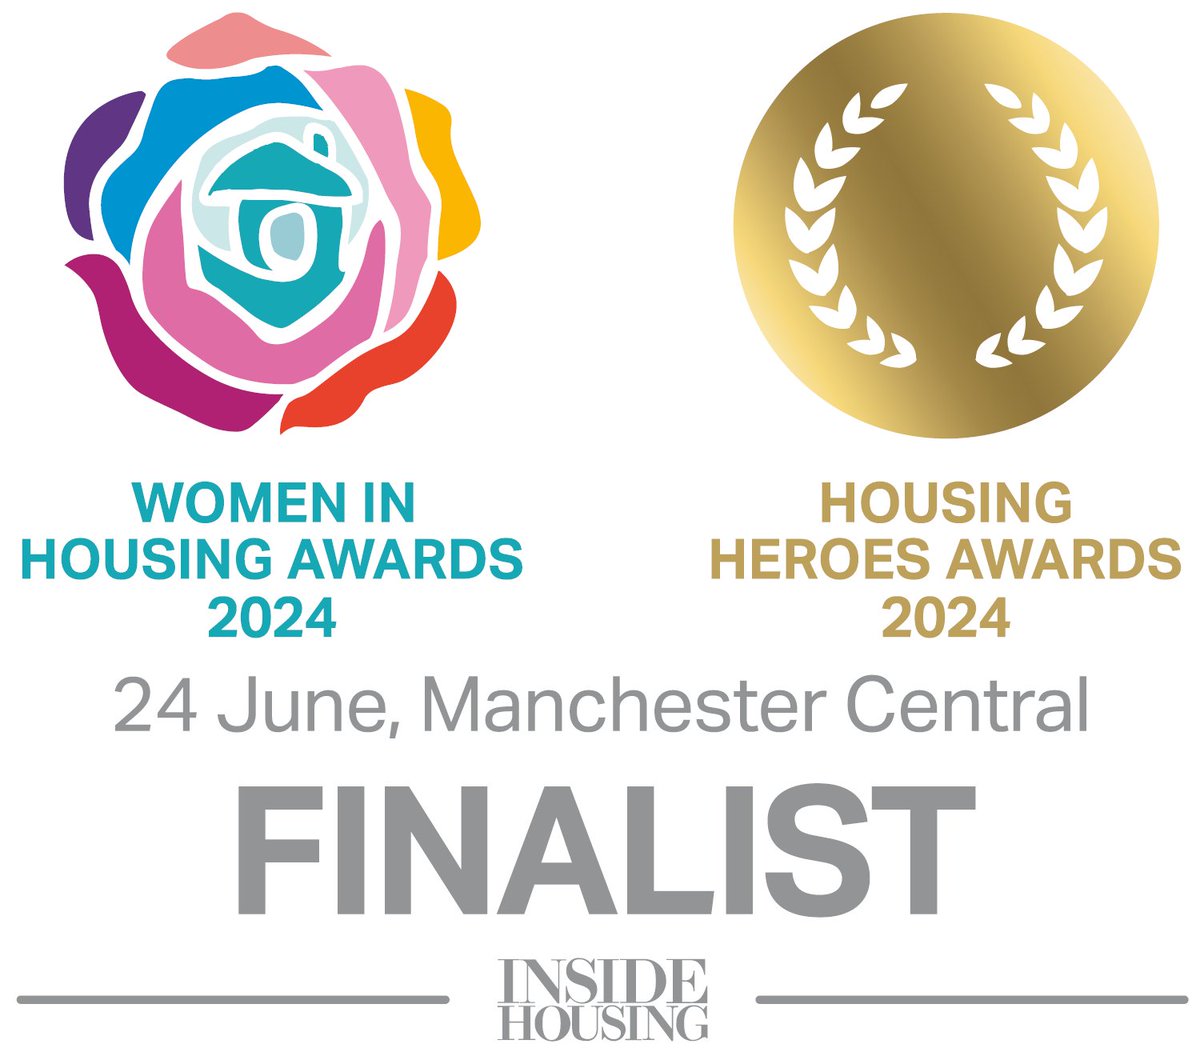 For the third year running we have been shortlisted in the Best Company Wellbeing and Health Initiative category in @insidehousing Housing Heroes awards. For details go to bvt.org.uk/uncategorized/…